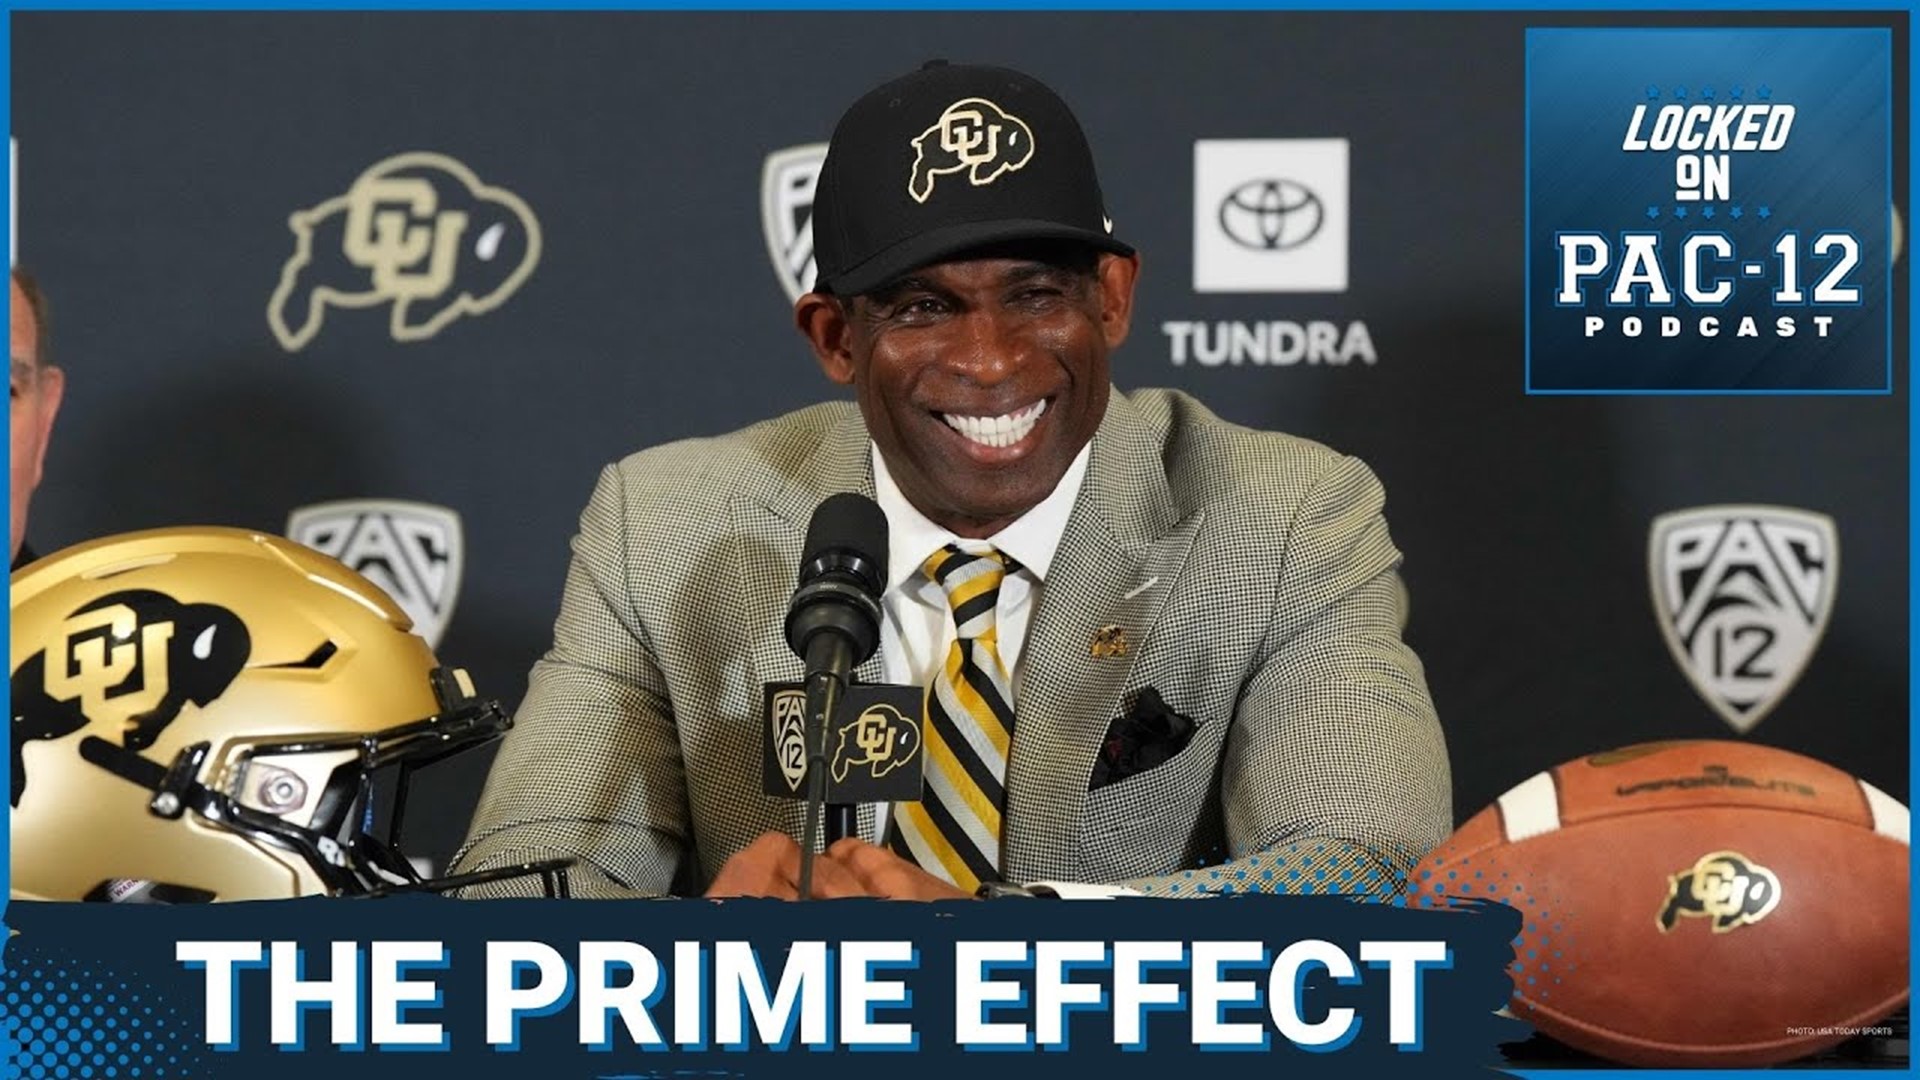 How Deion Sanders Could Impact NFL Even If He Stays at Colorado